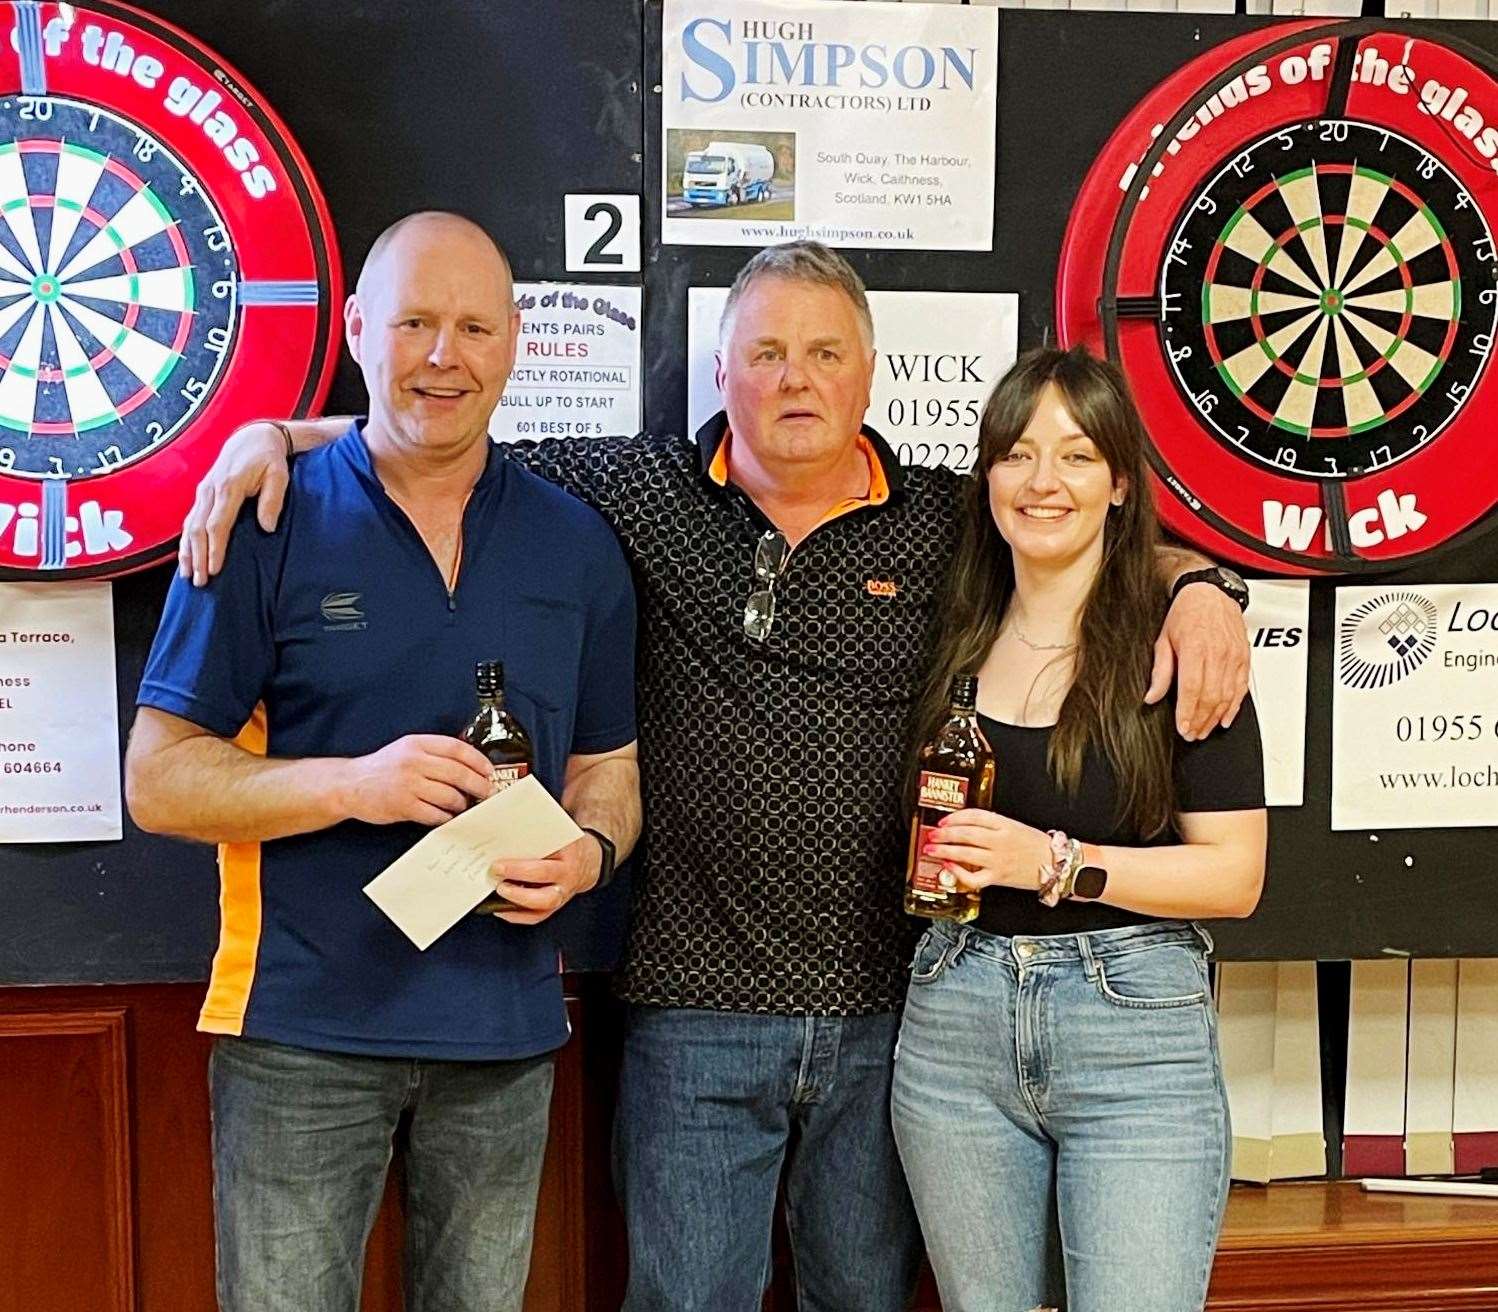 Singles winners Kevin Gray and Courtney McBain with Arthur Bruce, one of the Friends of the Glass organisers.